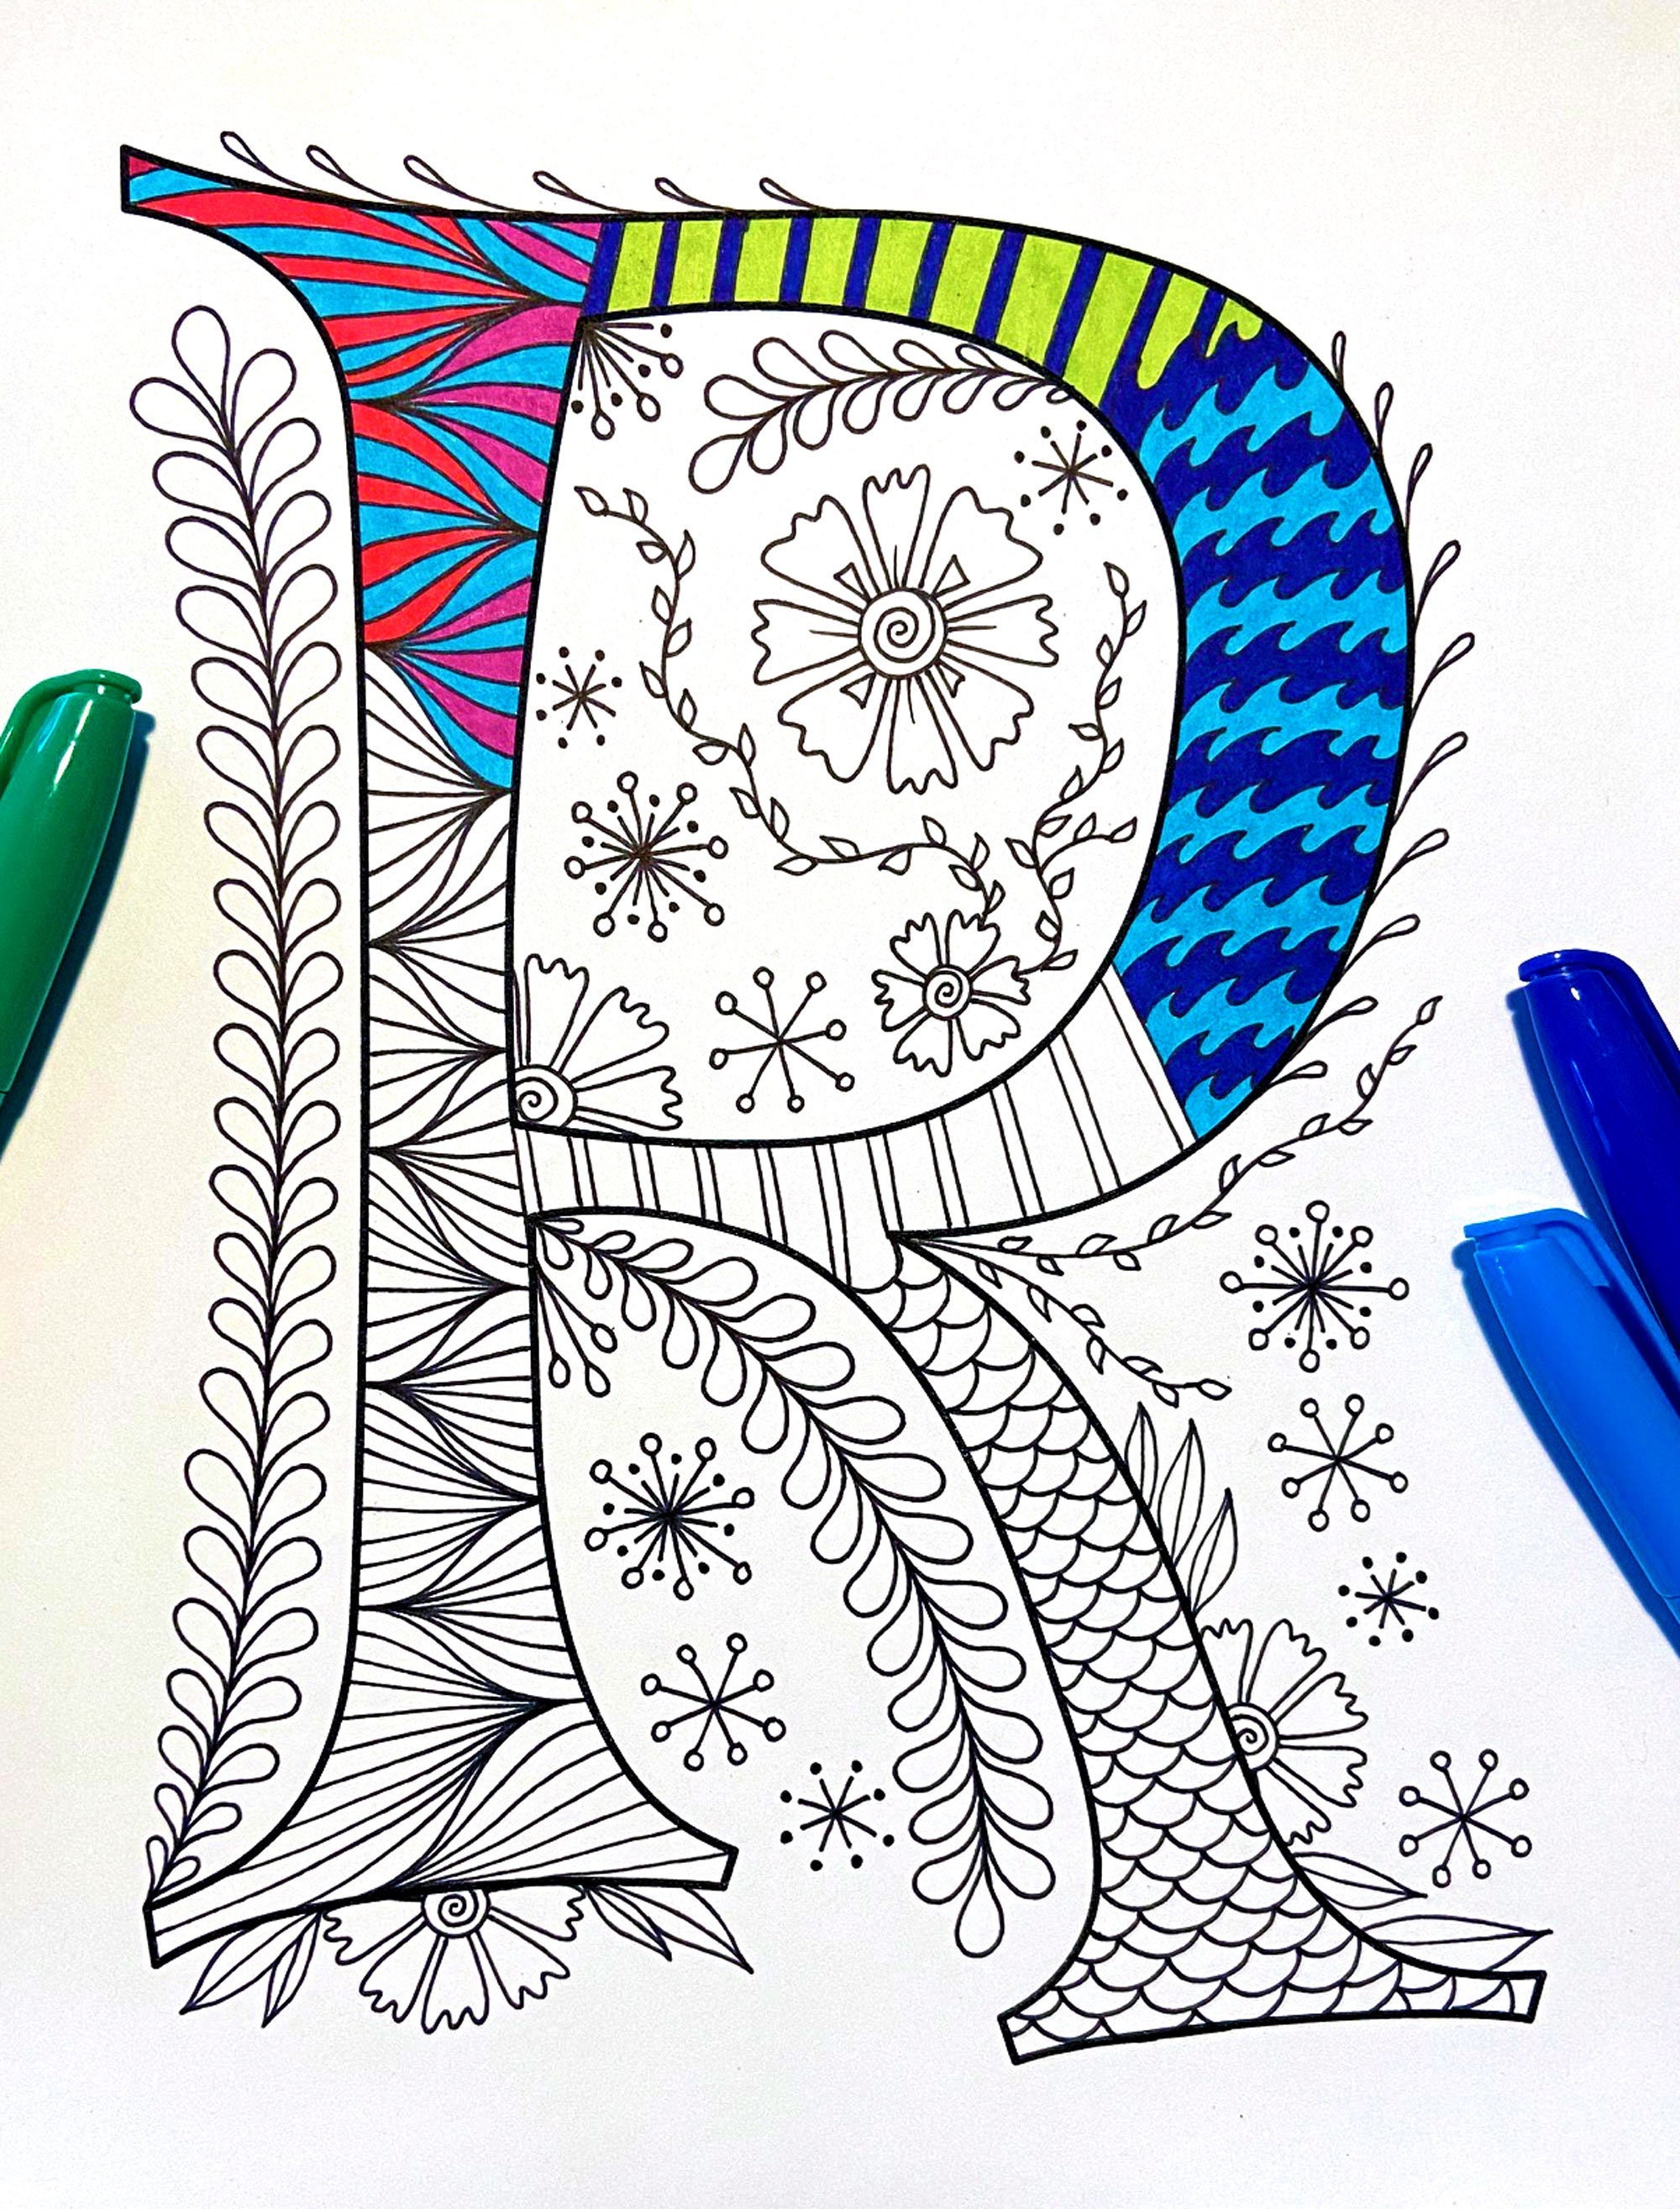 Retro Floral Letter R Coloring Page Inspired by the Font - Etsy UK